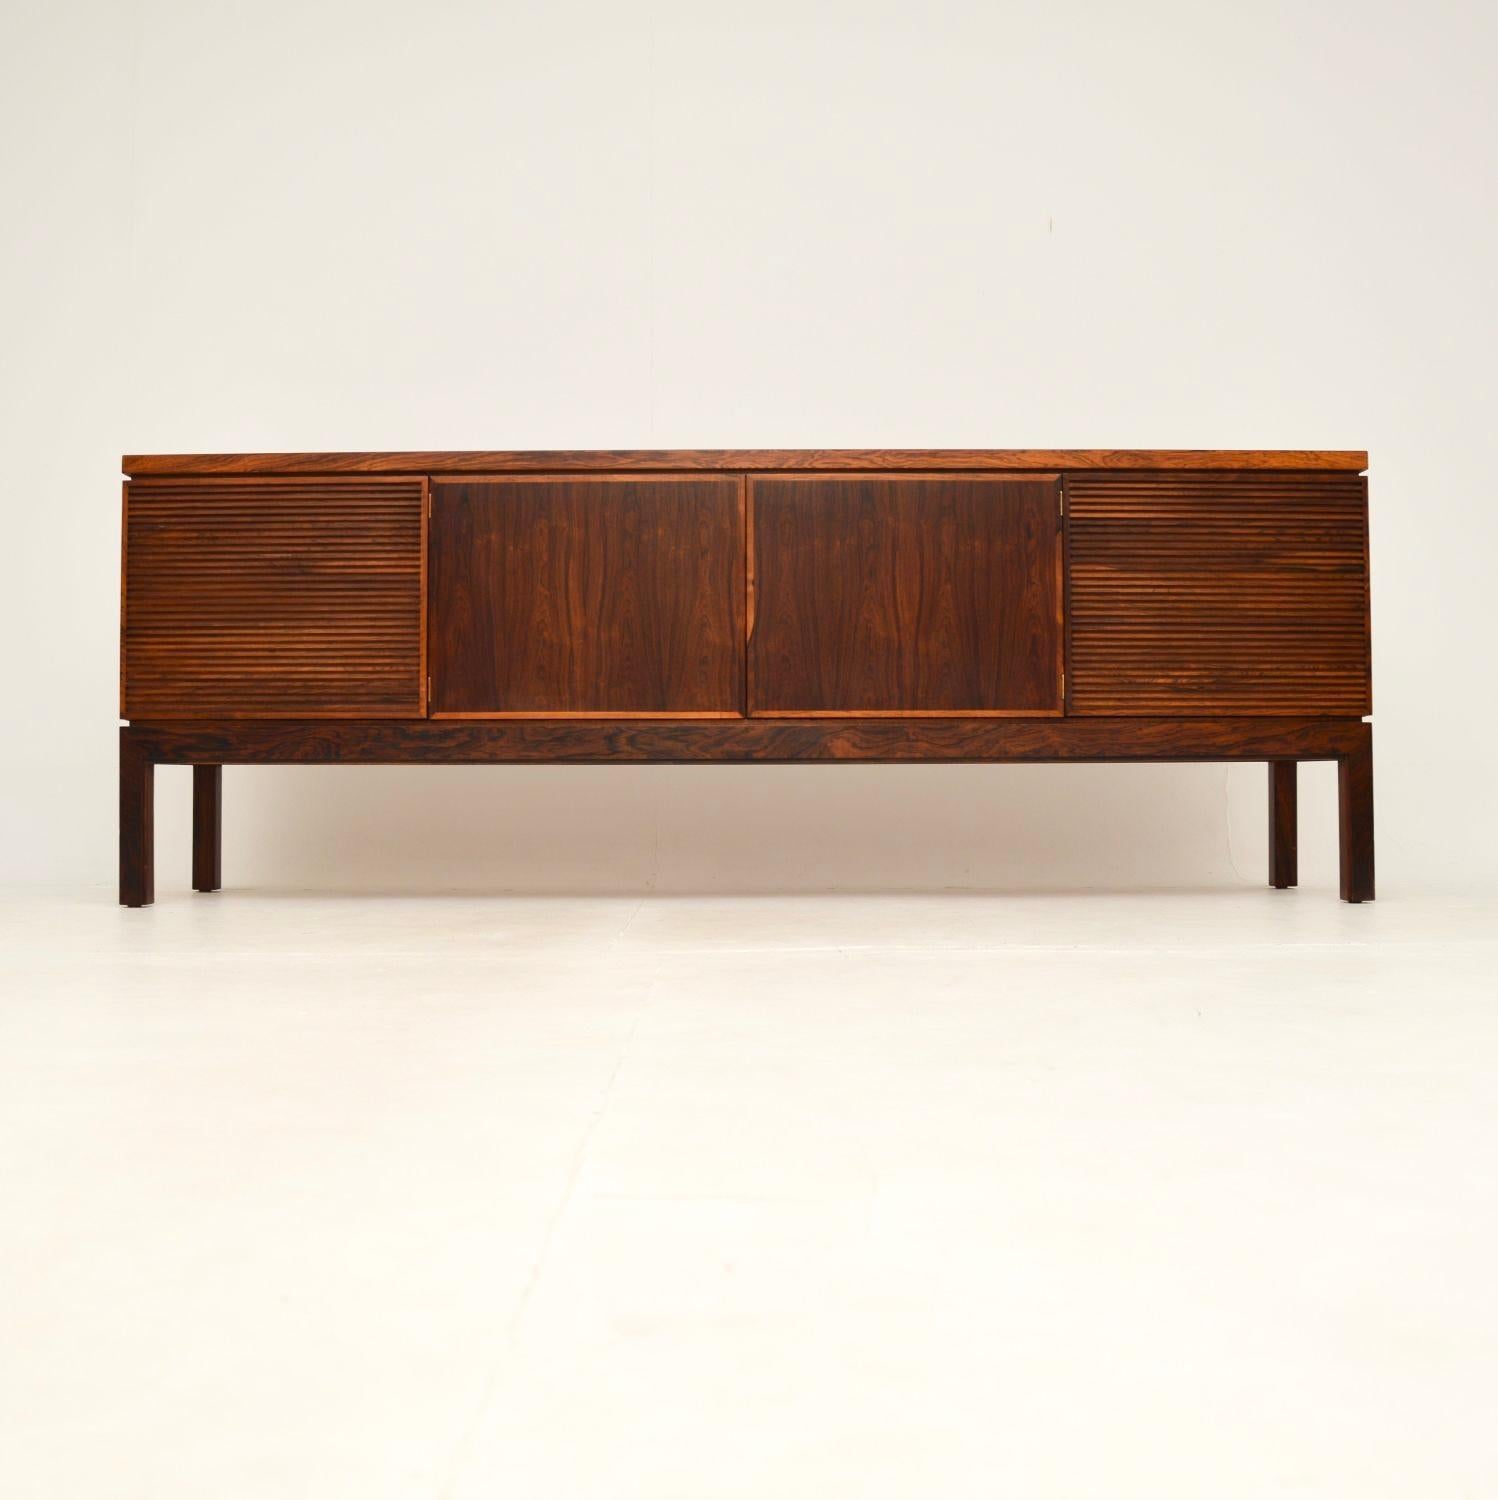 An impressive and extremely beautiful vintage sideboard by Robert Heritage for Archie Shine. This model is called the “Bridgeford” sideboard, it was made in England in the 1960’s.

This is of amazing quality, with many fine features. There are